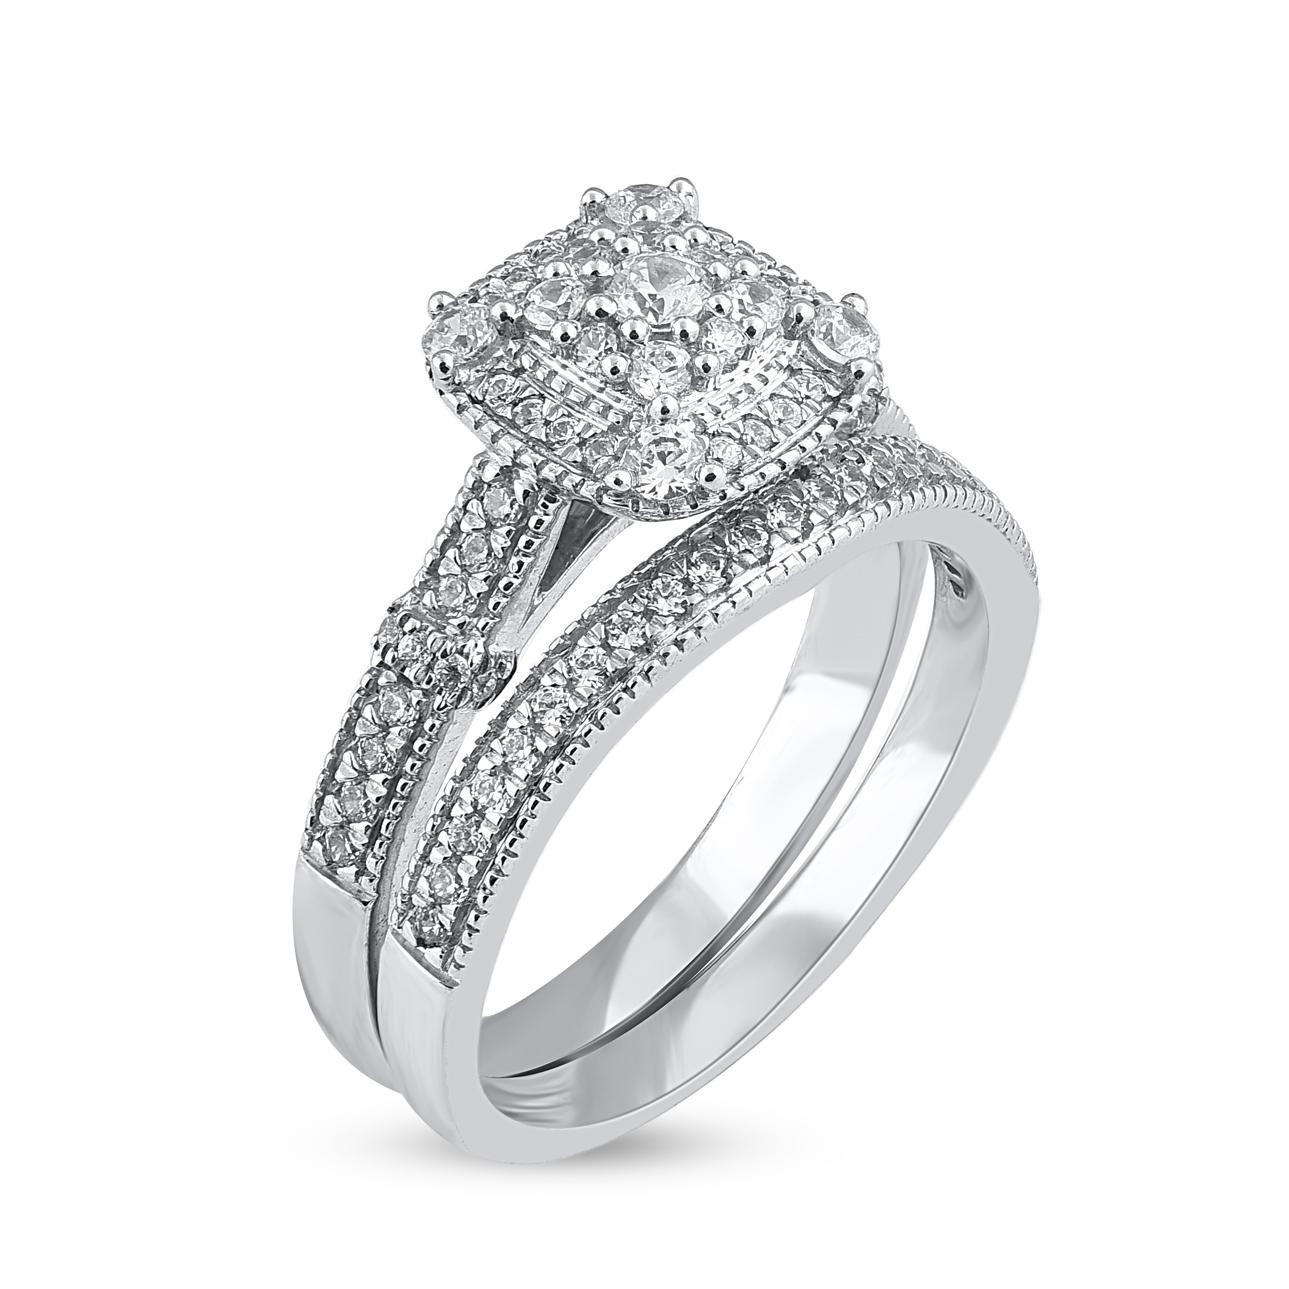 Contemporary TJD 0.65 Carat Natural Round Cut Diamond 14KT White Gold Halo Bridal Ring Set For Sale